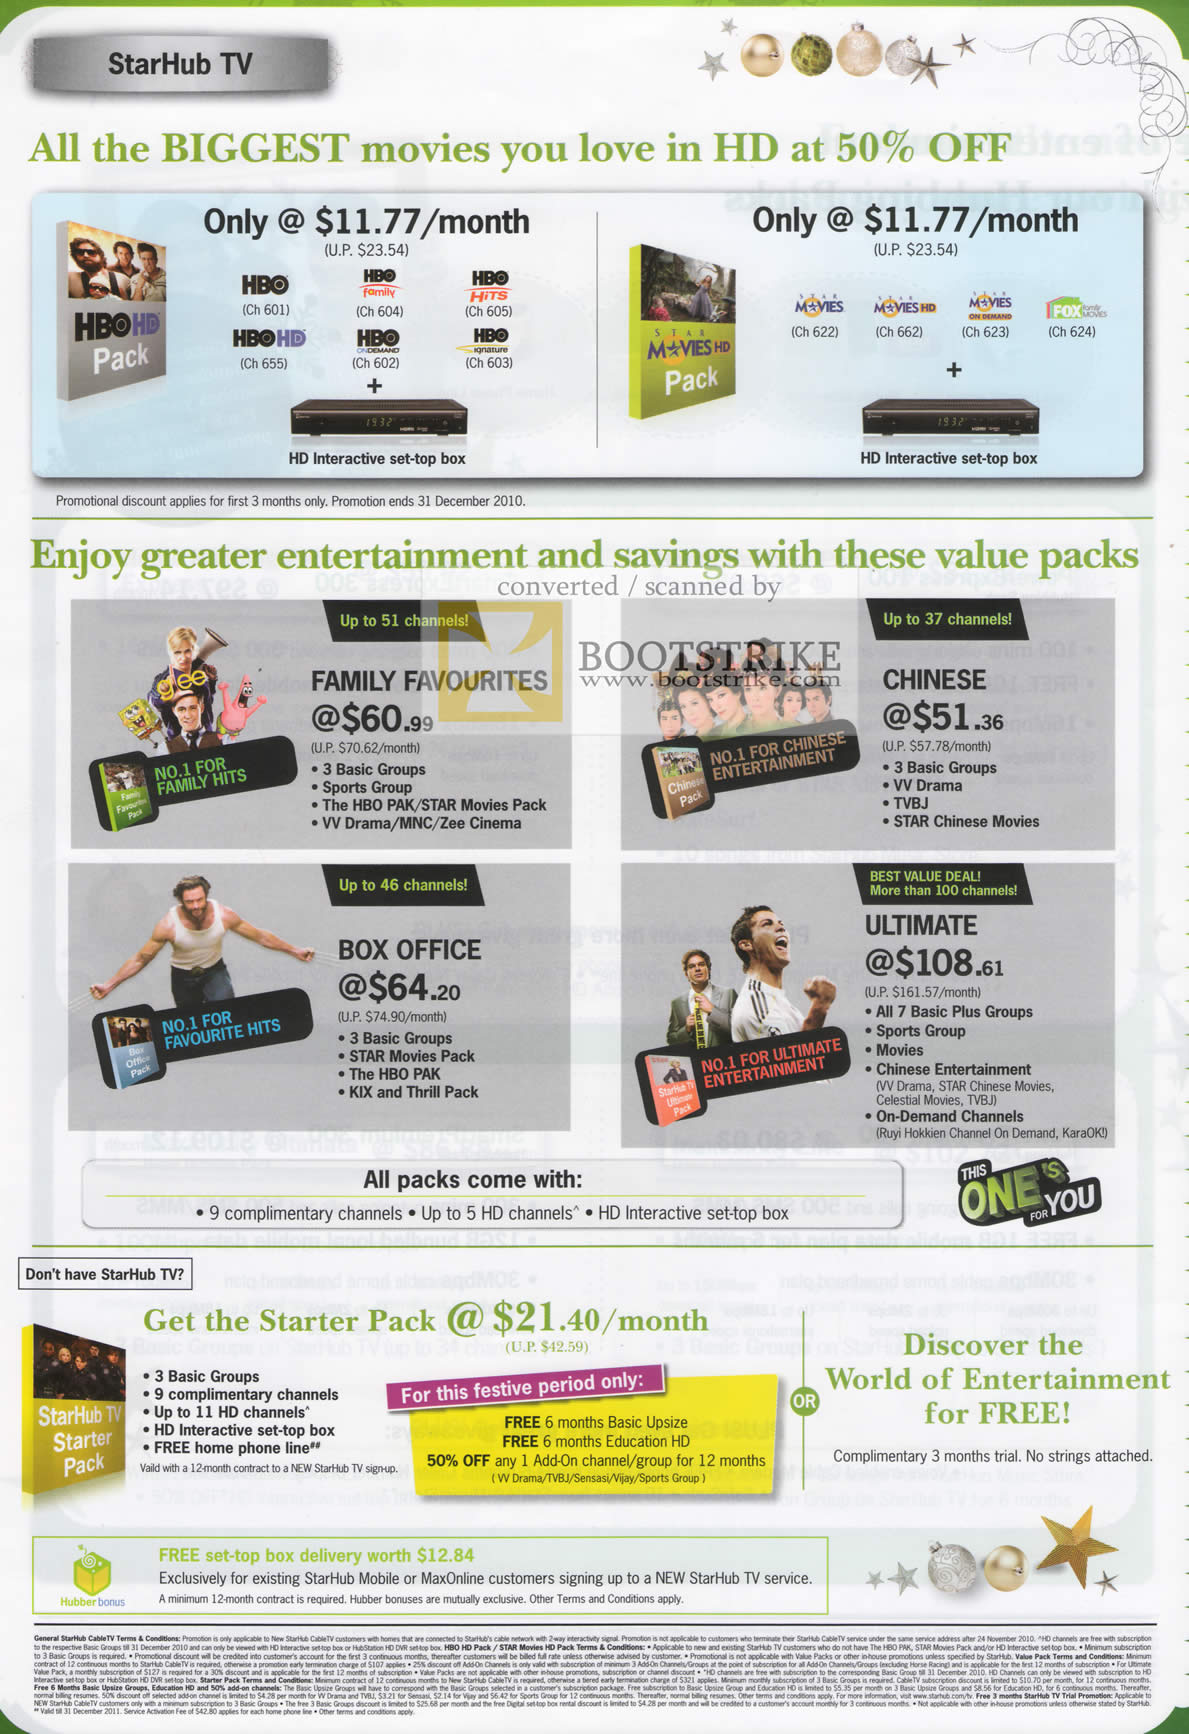 Sitex 2010 price list image brochure of Starhub TV Movies Cable TV Starter Pack Box Office Family Favourites